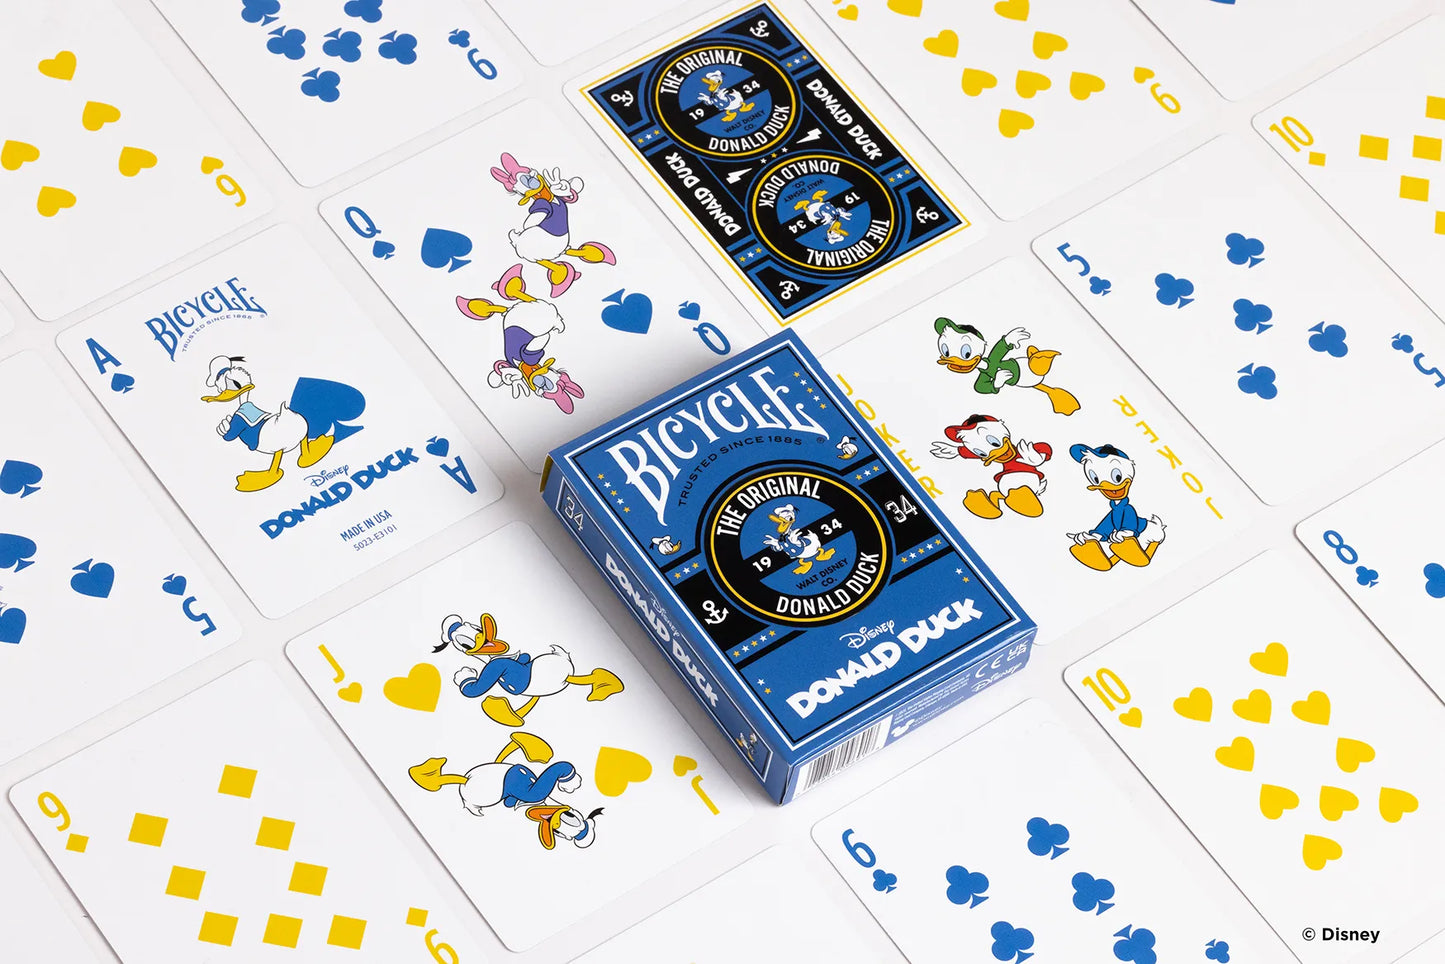 Disney Classic Donald Duck Inspired Playing Cards by Bicycle